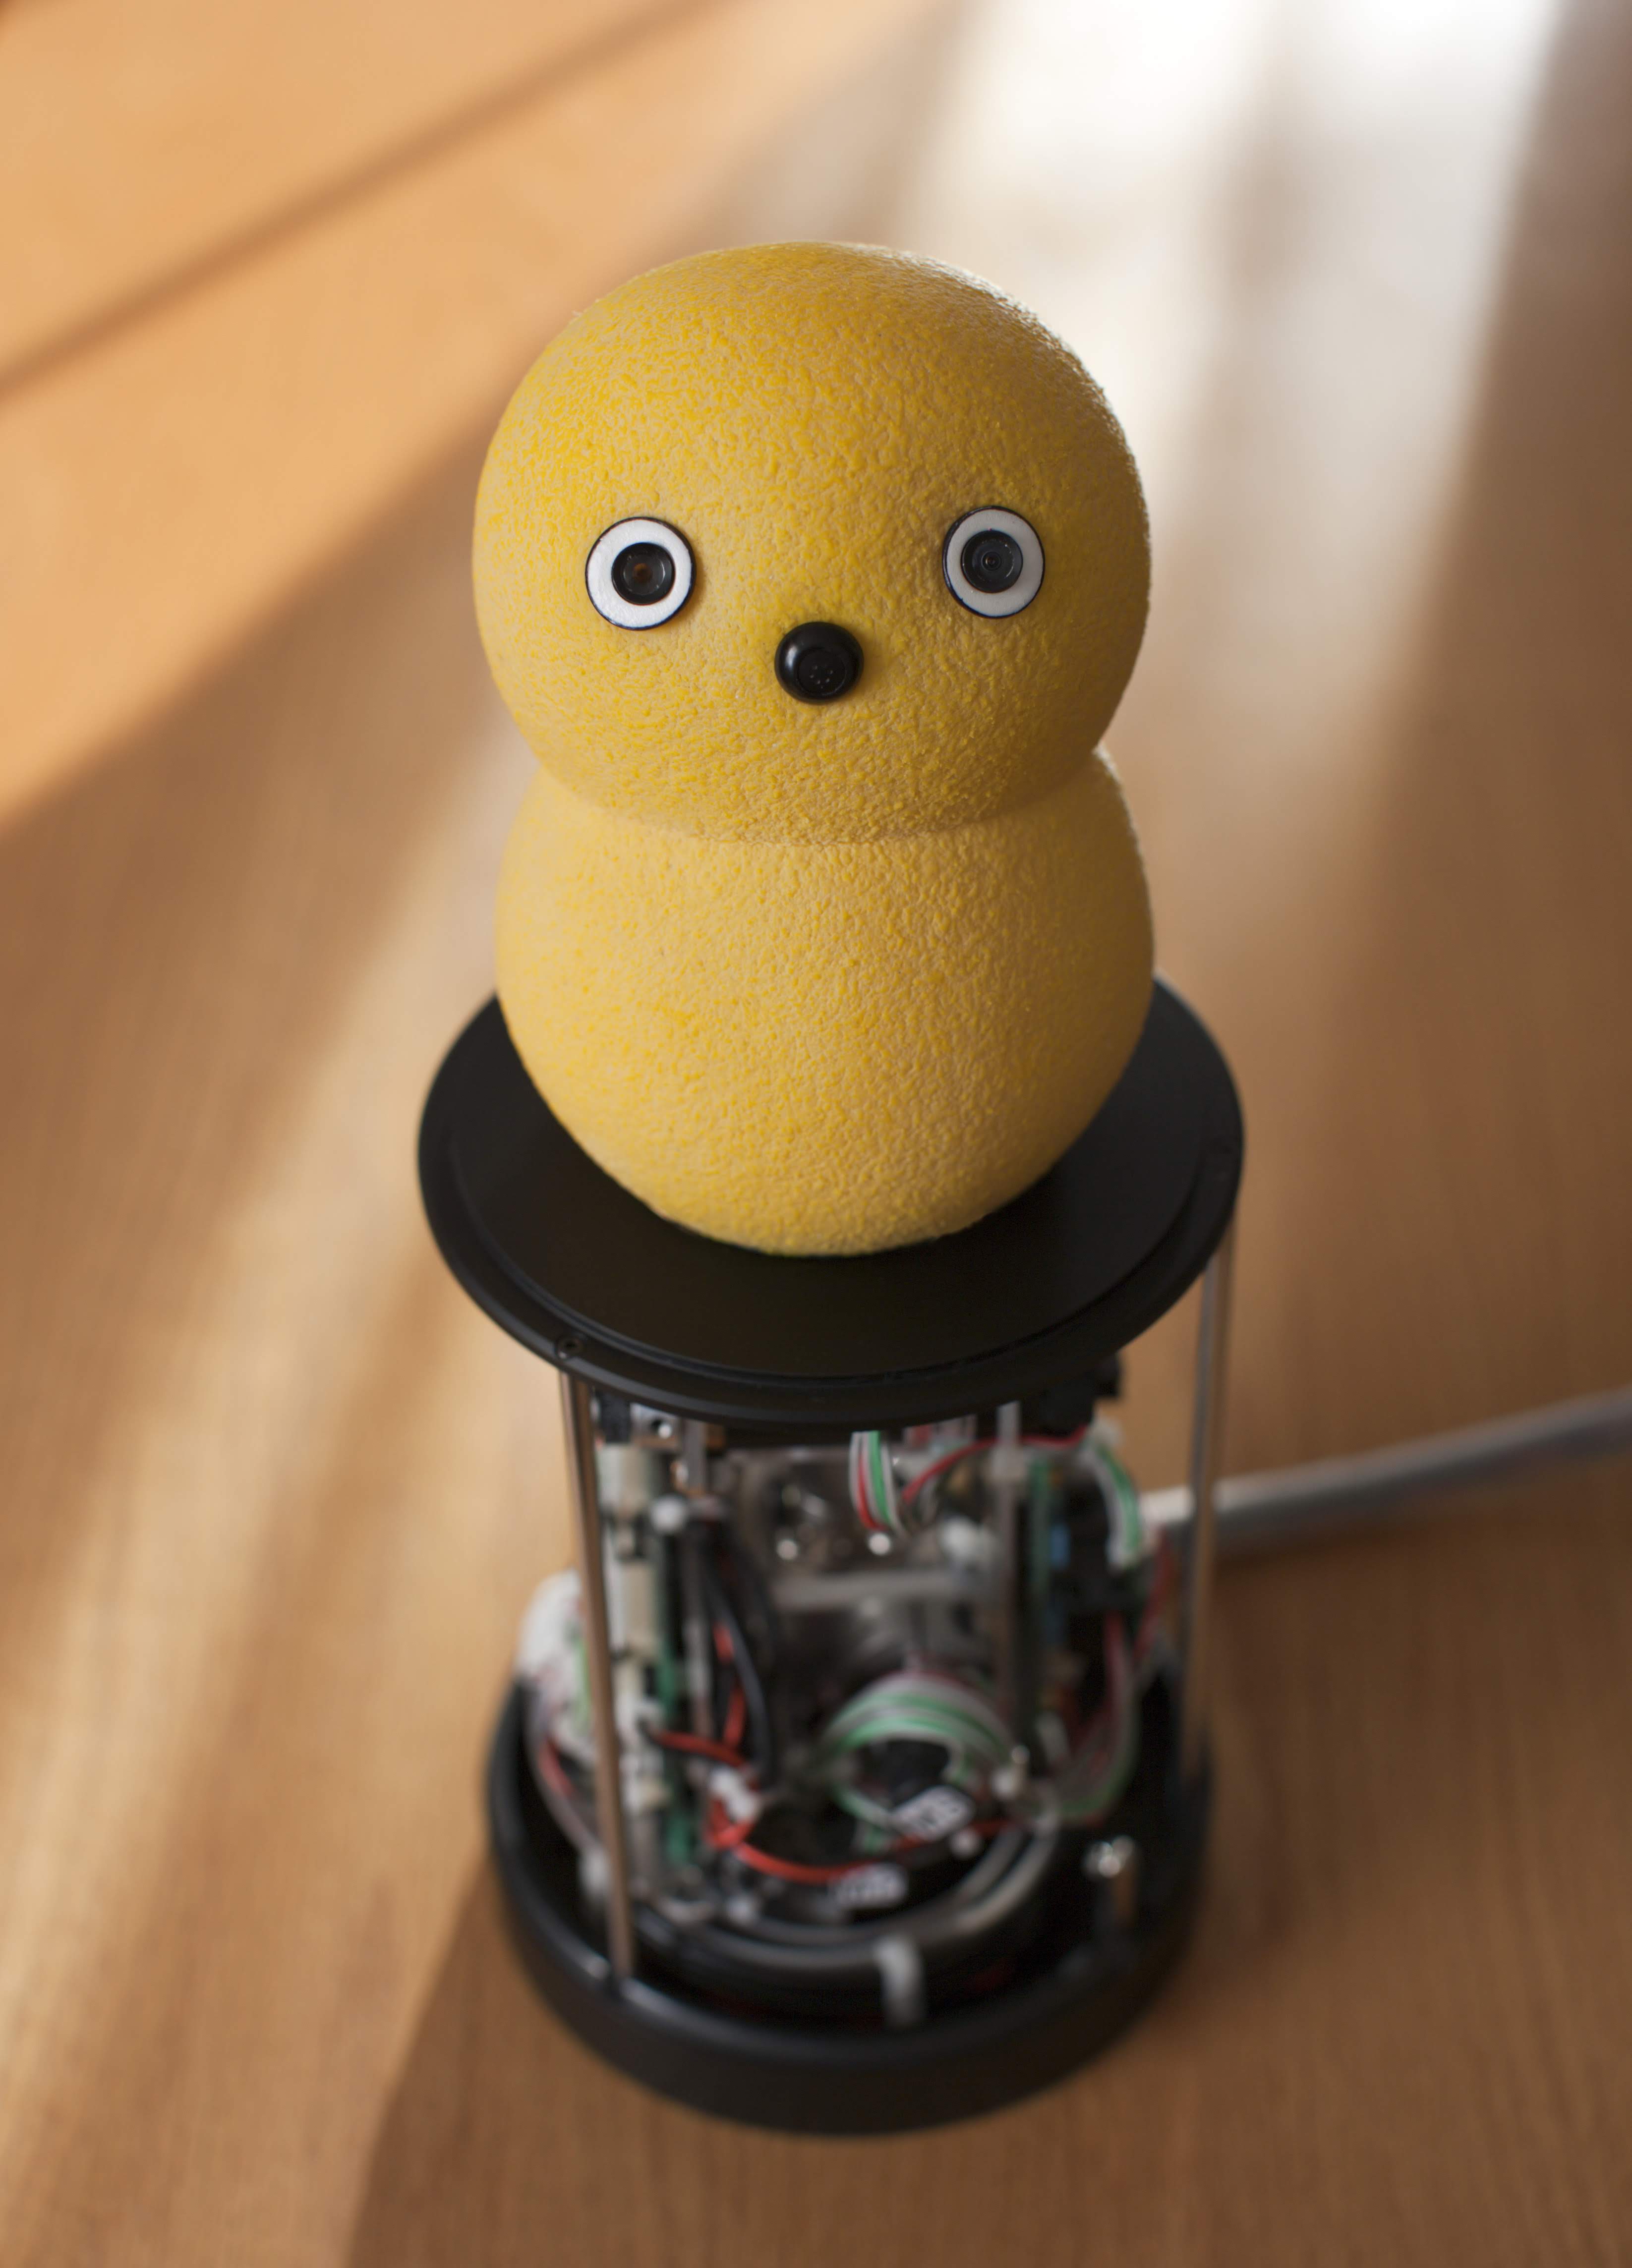 Keepon, carry on | ProWellTech 4